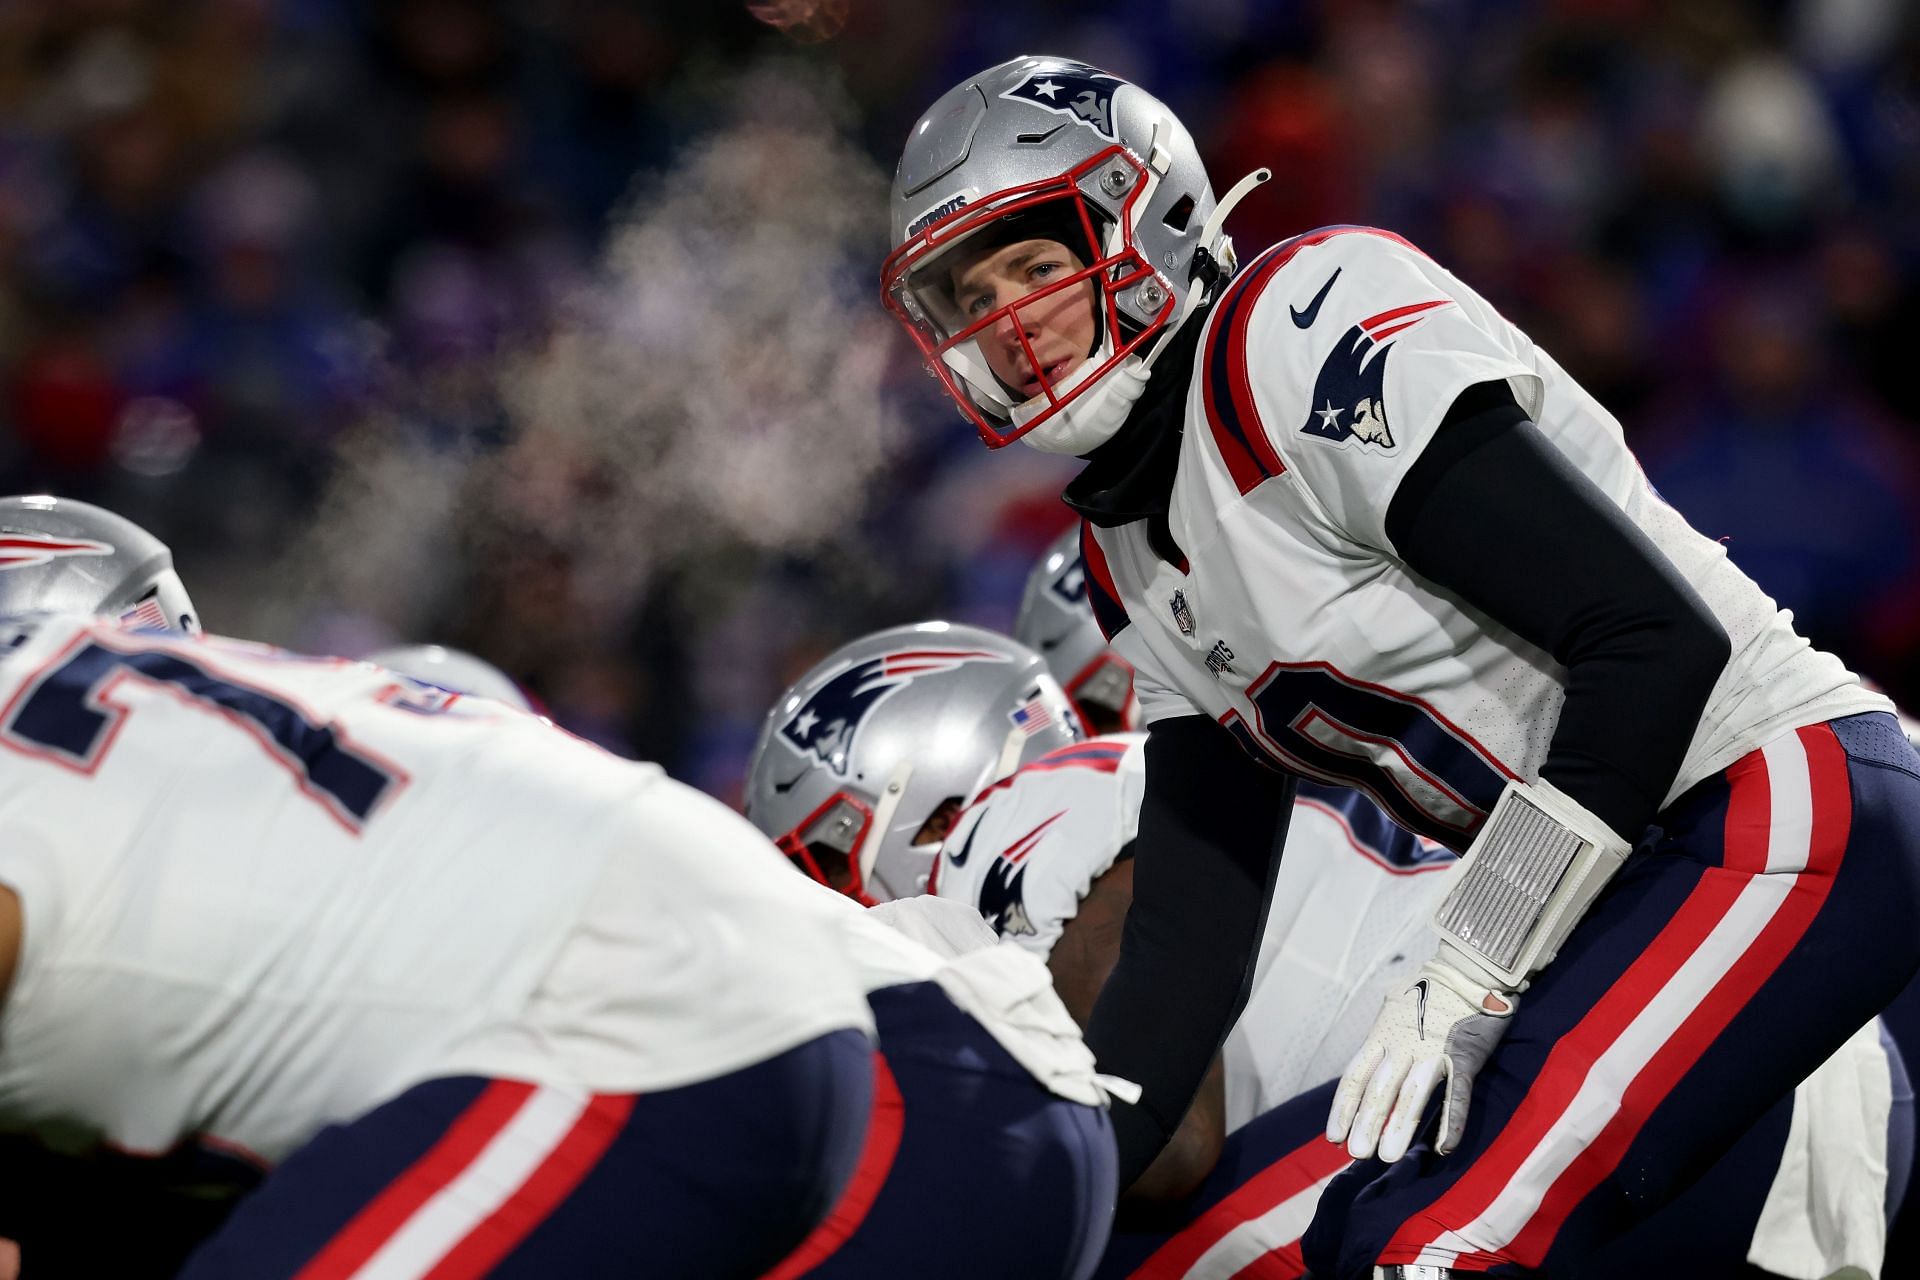 New England Patriots Schedule 2022: Dates, Time, Opponents and win